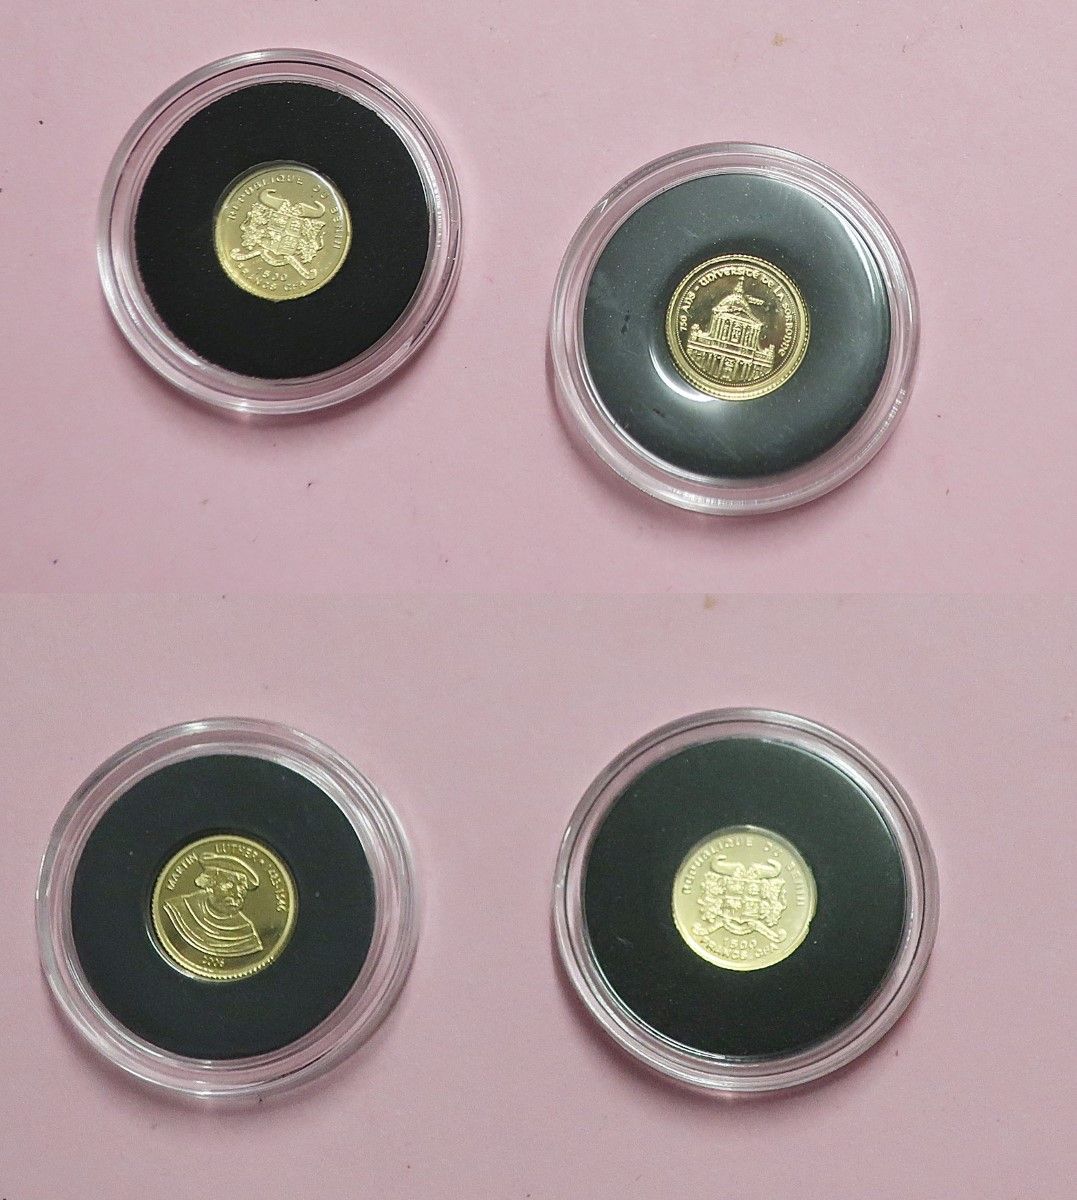 Null 2 gold coin 1500 FR - Benin, approx. 1,25 gram each, 999 gold, together